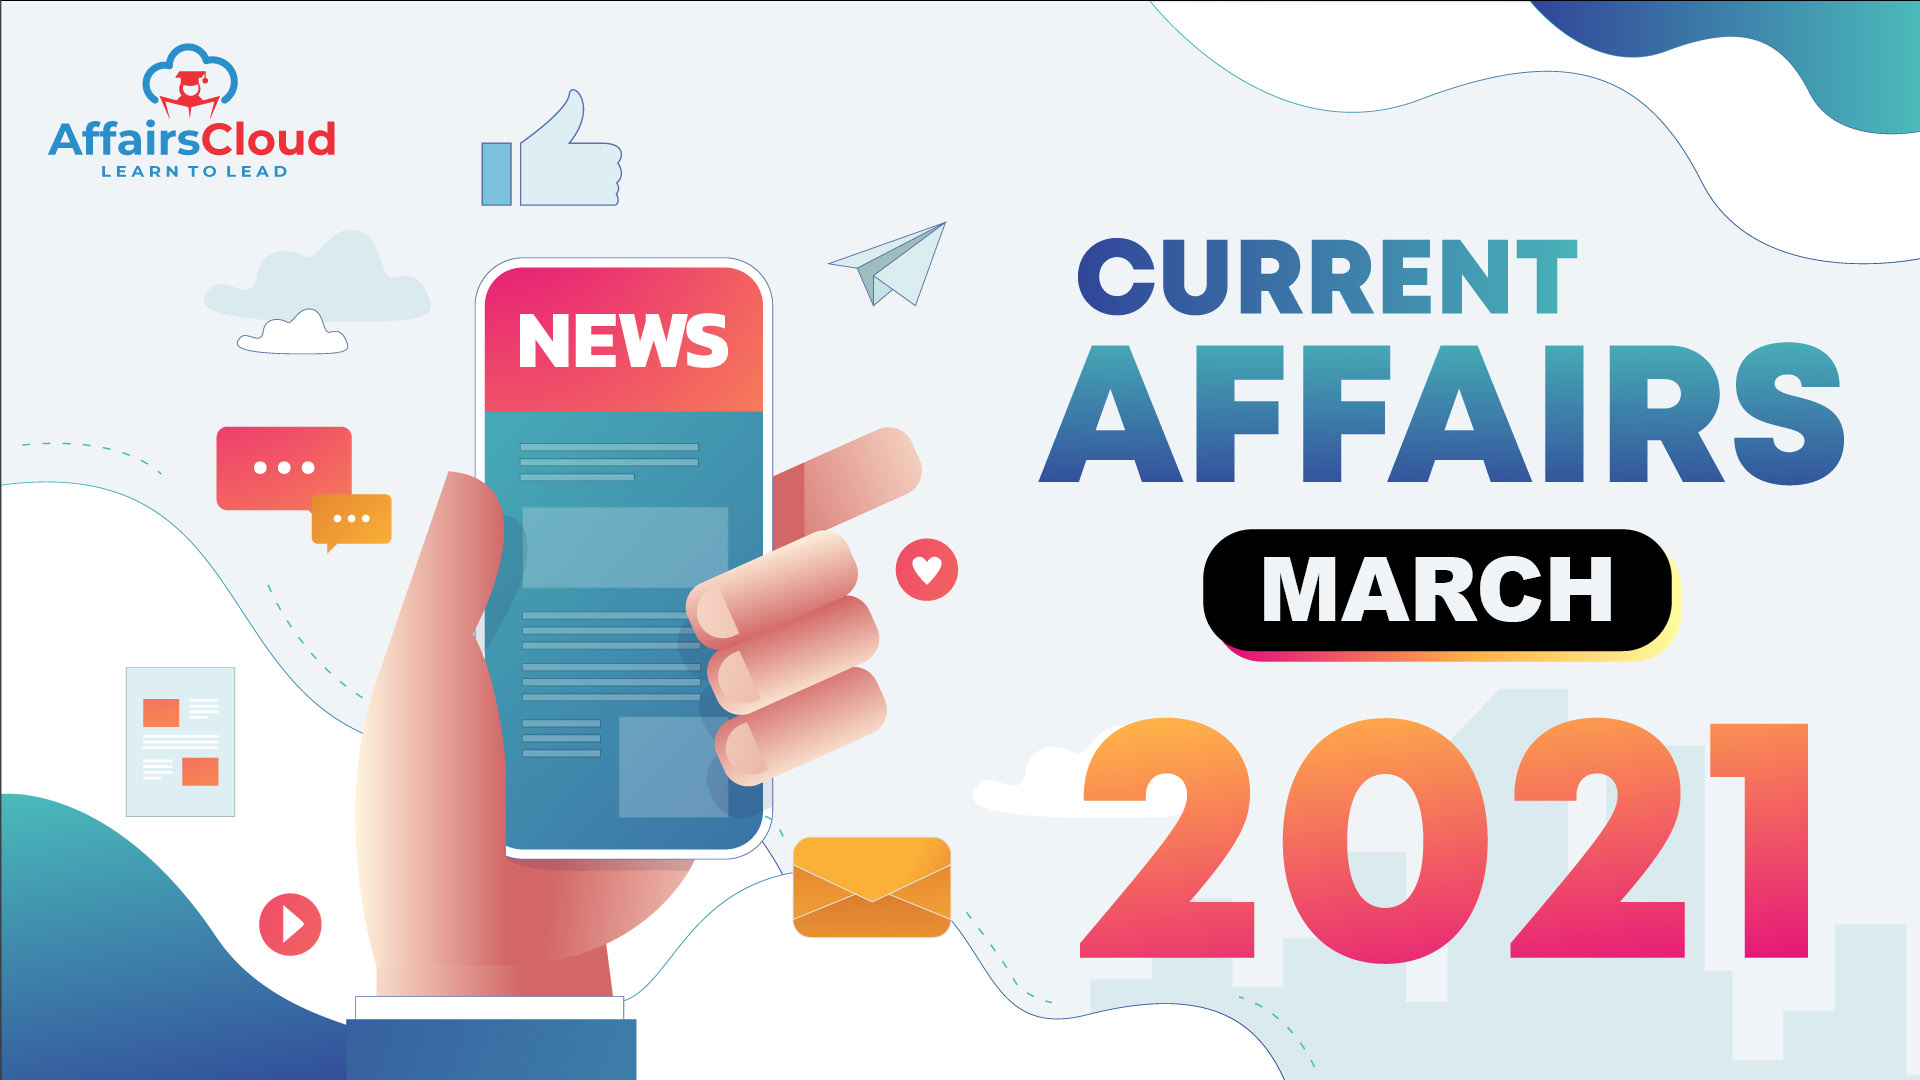 CURRENT-AFFAIRS-MONTHY MARCH-2021